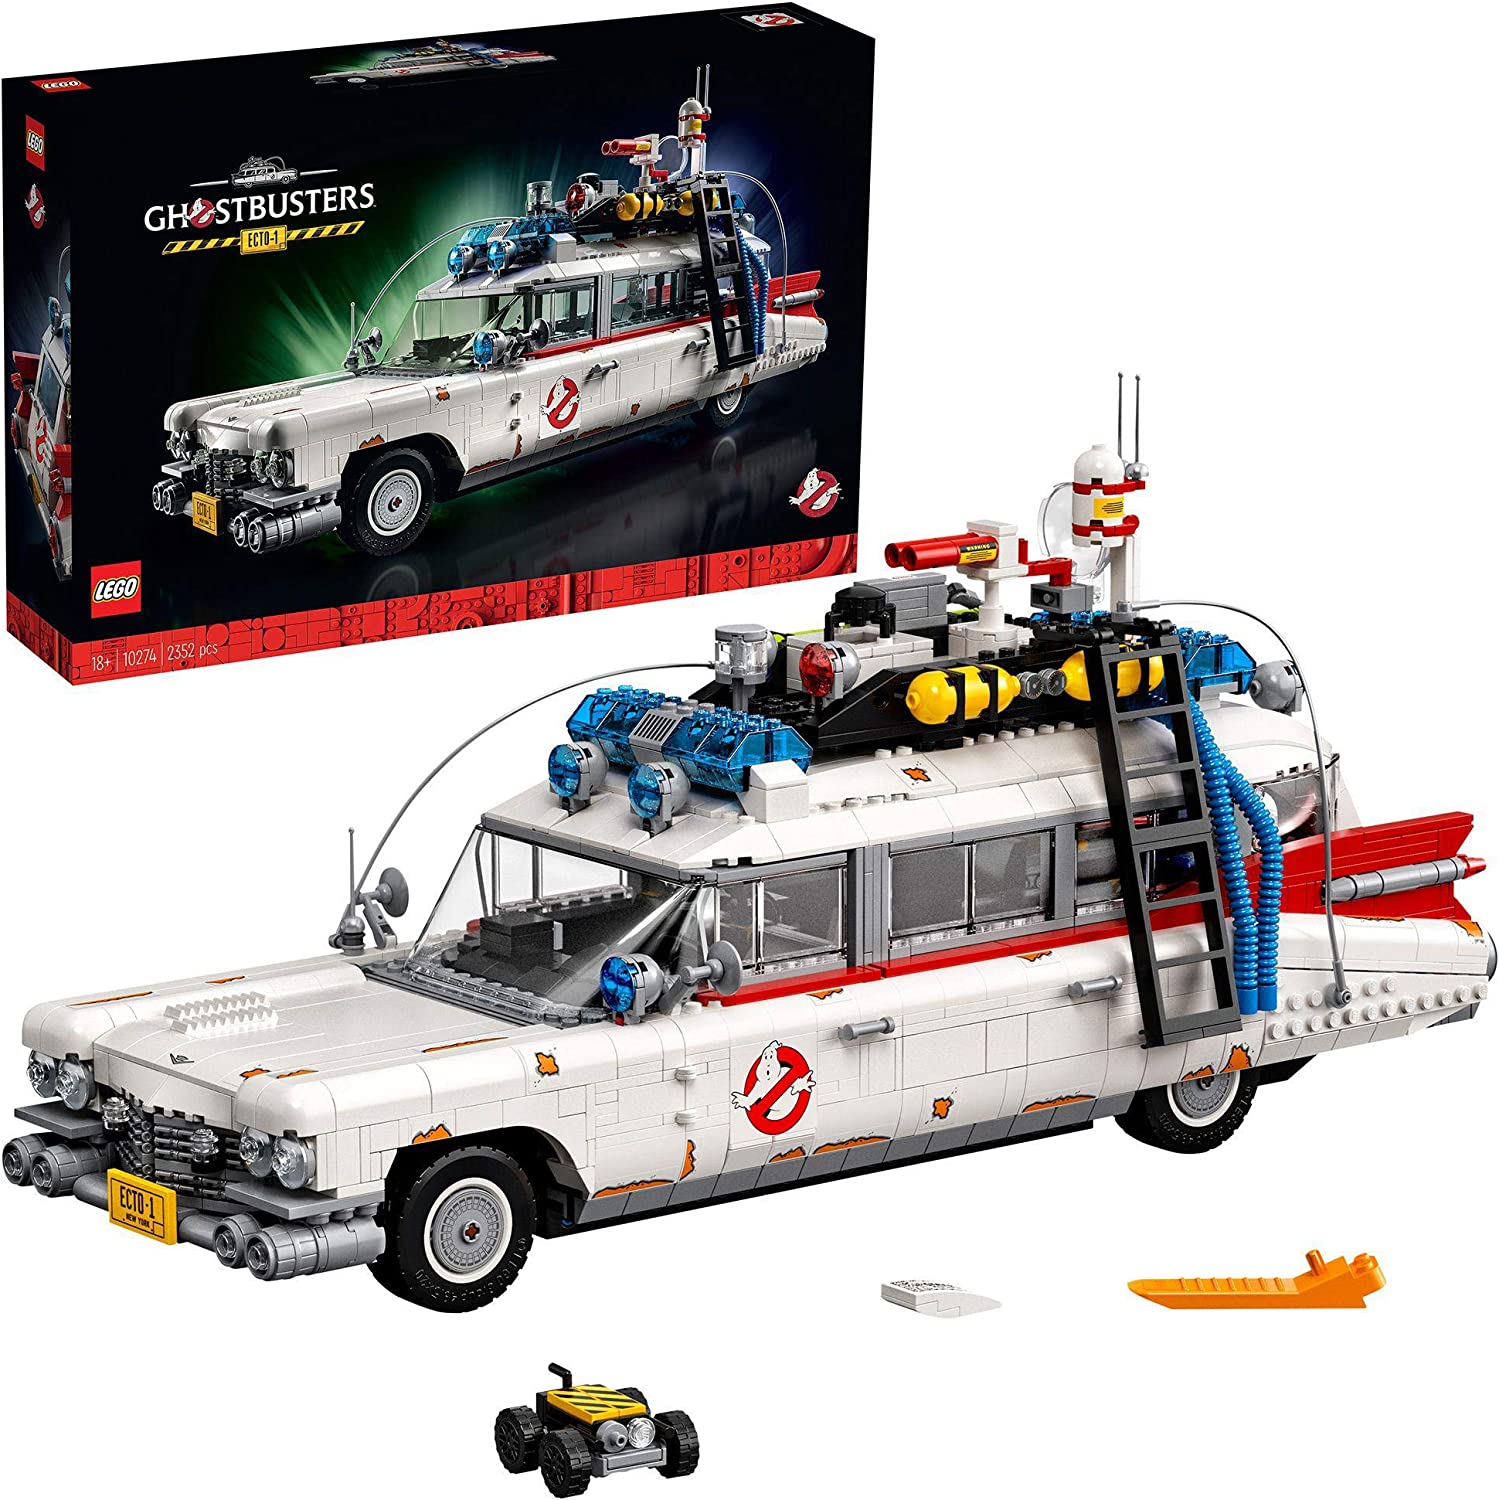 LEGO 10274 Ghostbusters Ecto-1 Large Adult Display Set